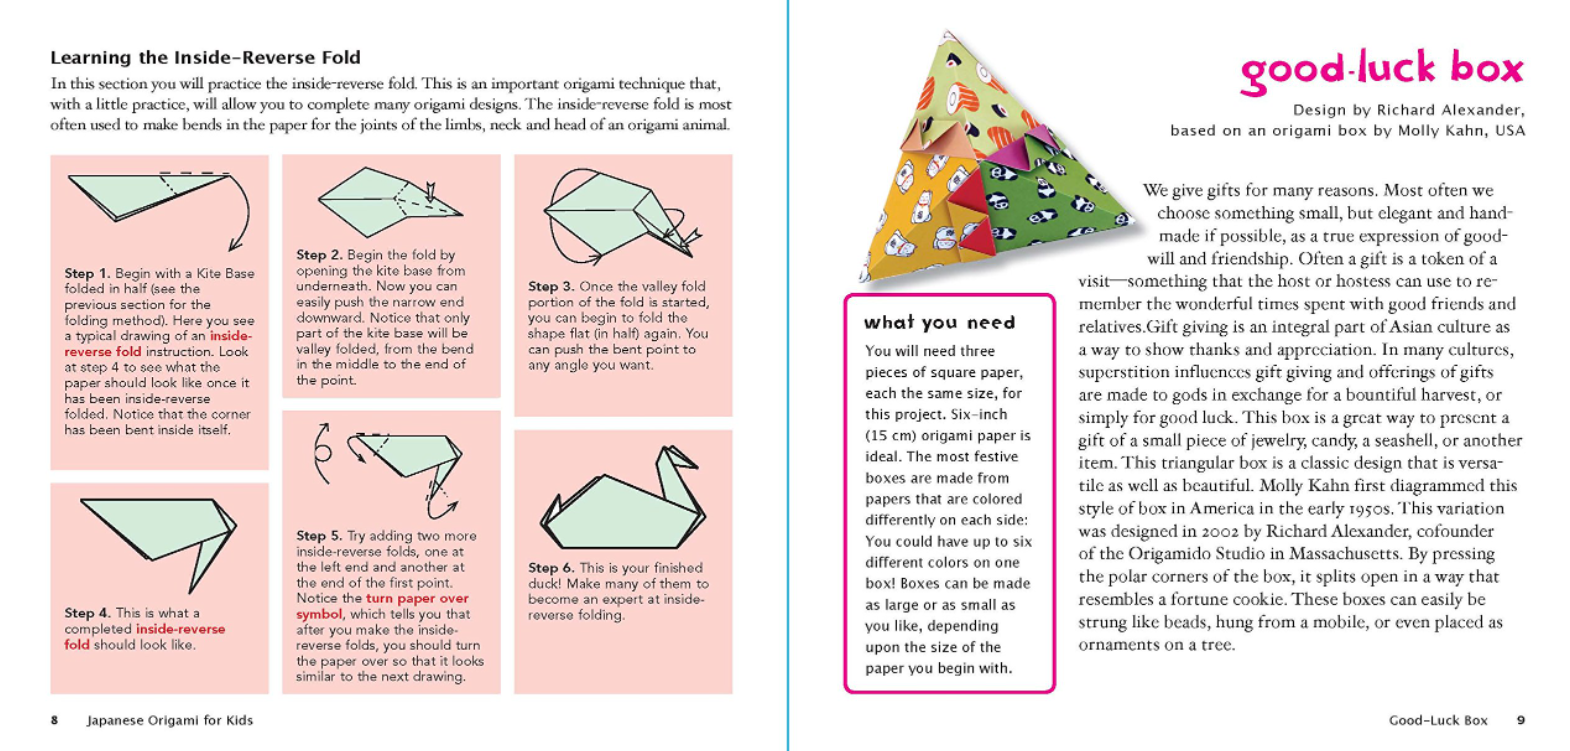 Origami books for kids - Japan Today